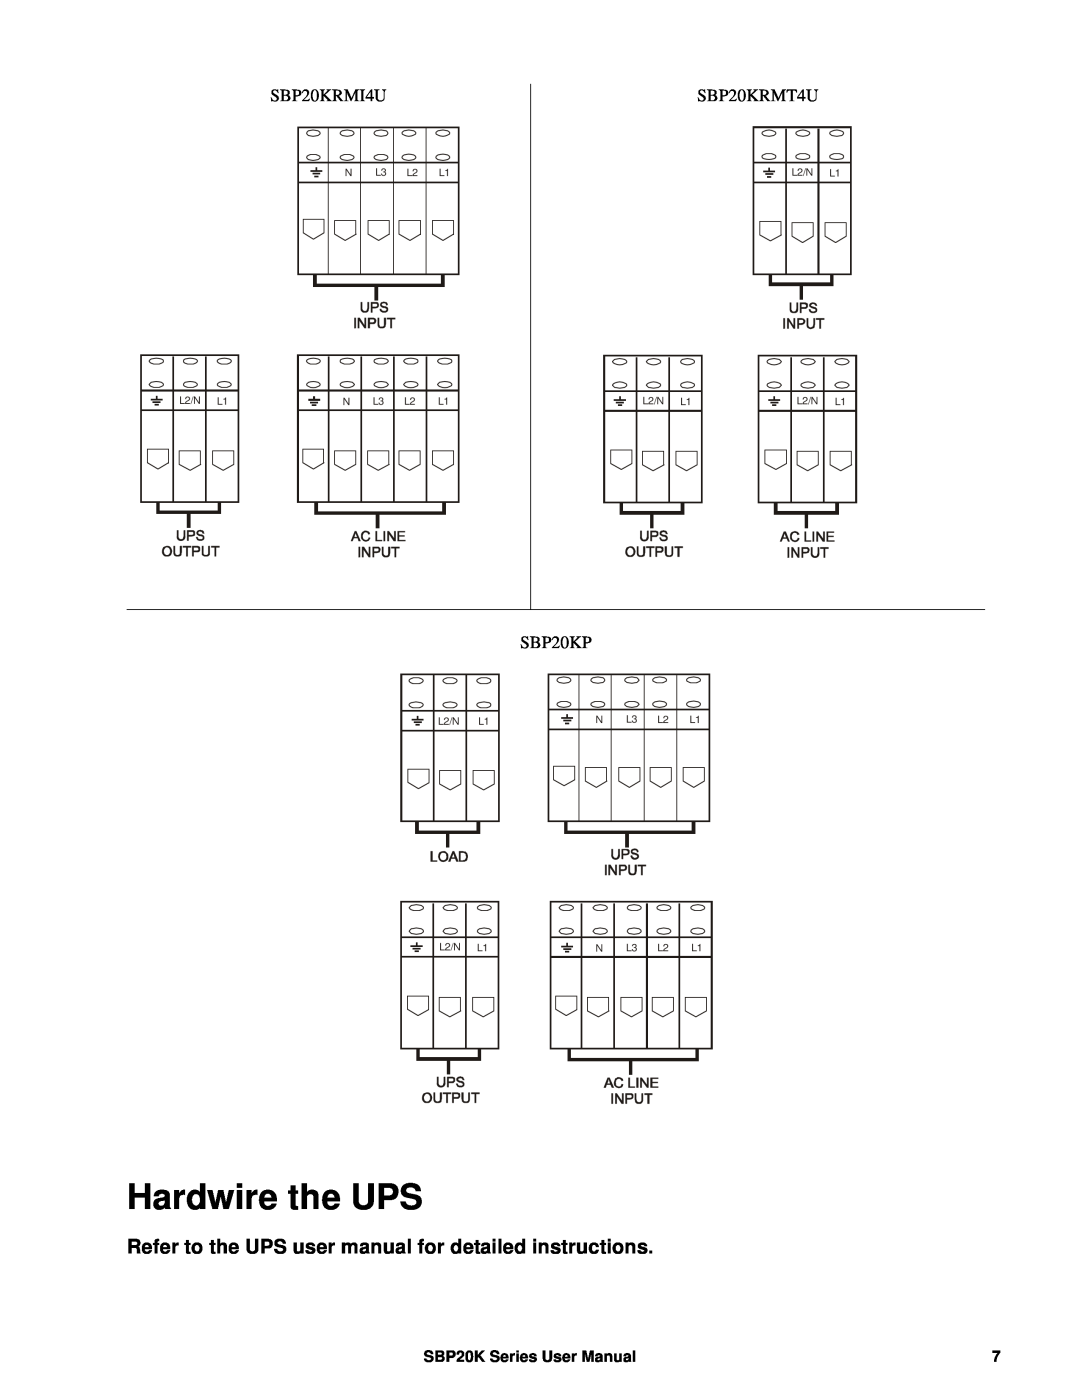 APC suo0707a Hardwire the UPS, Refer to the UPS user manual for detailed instructions, SBP20K Series User Manual, L2/N 